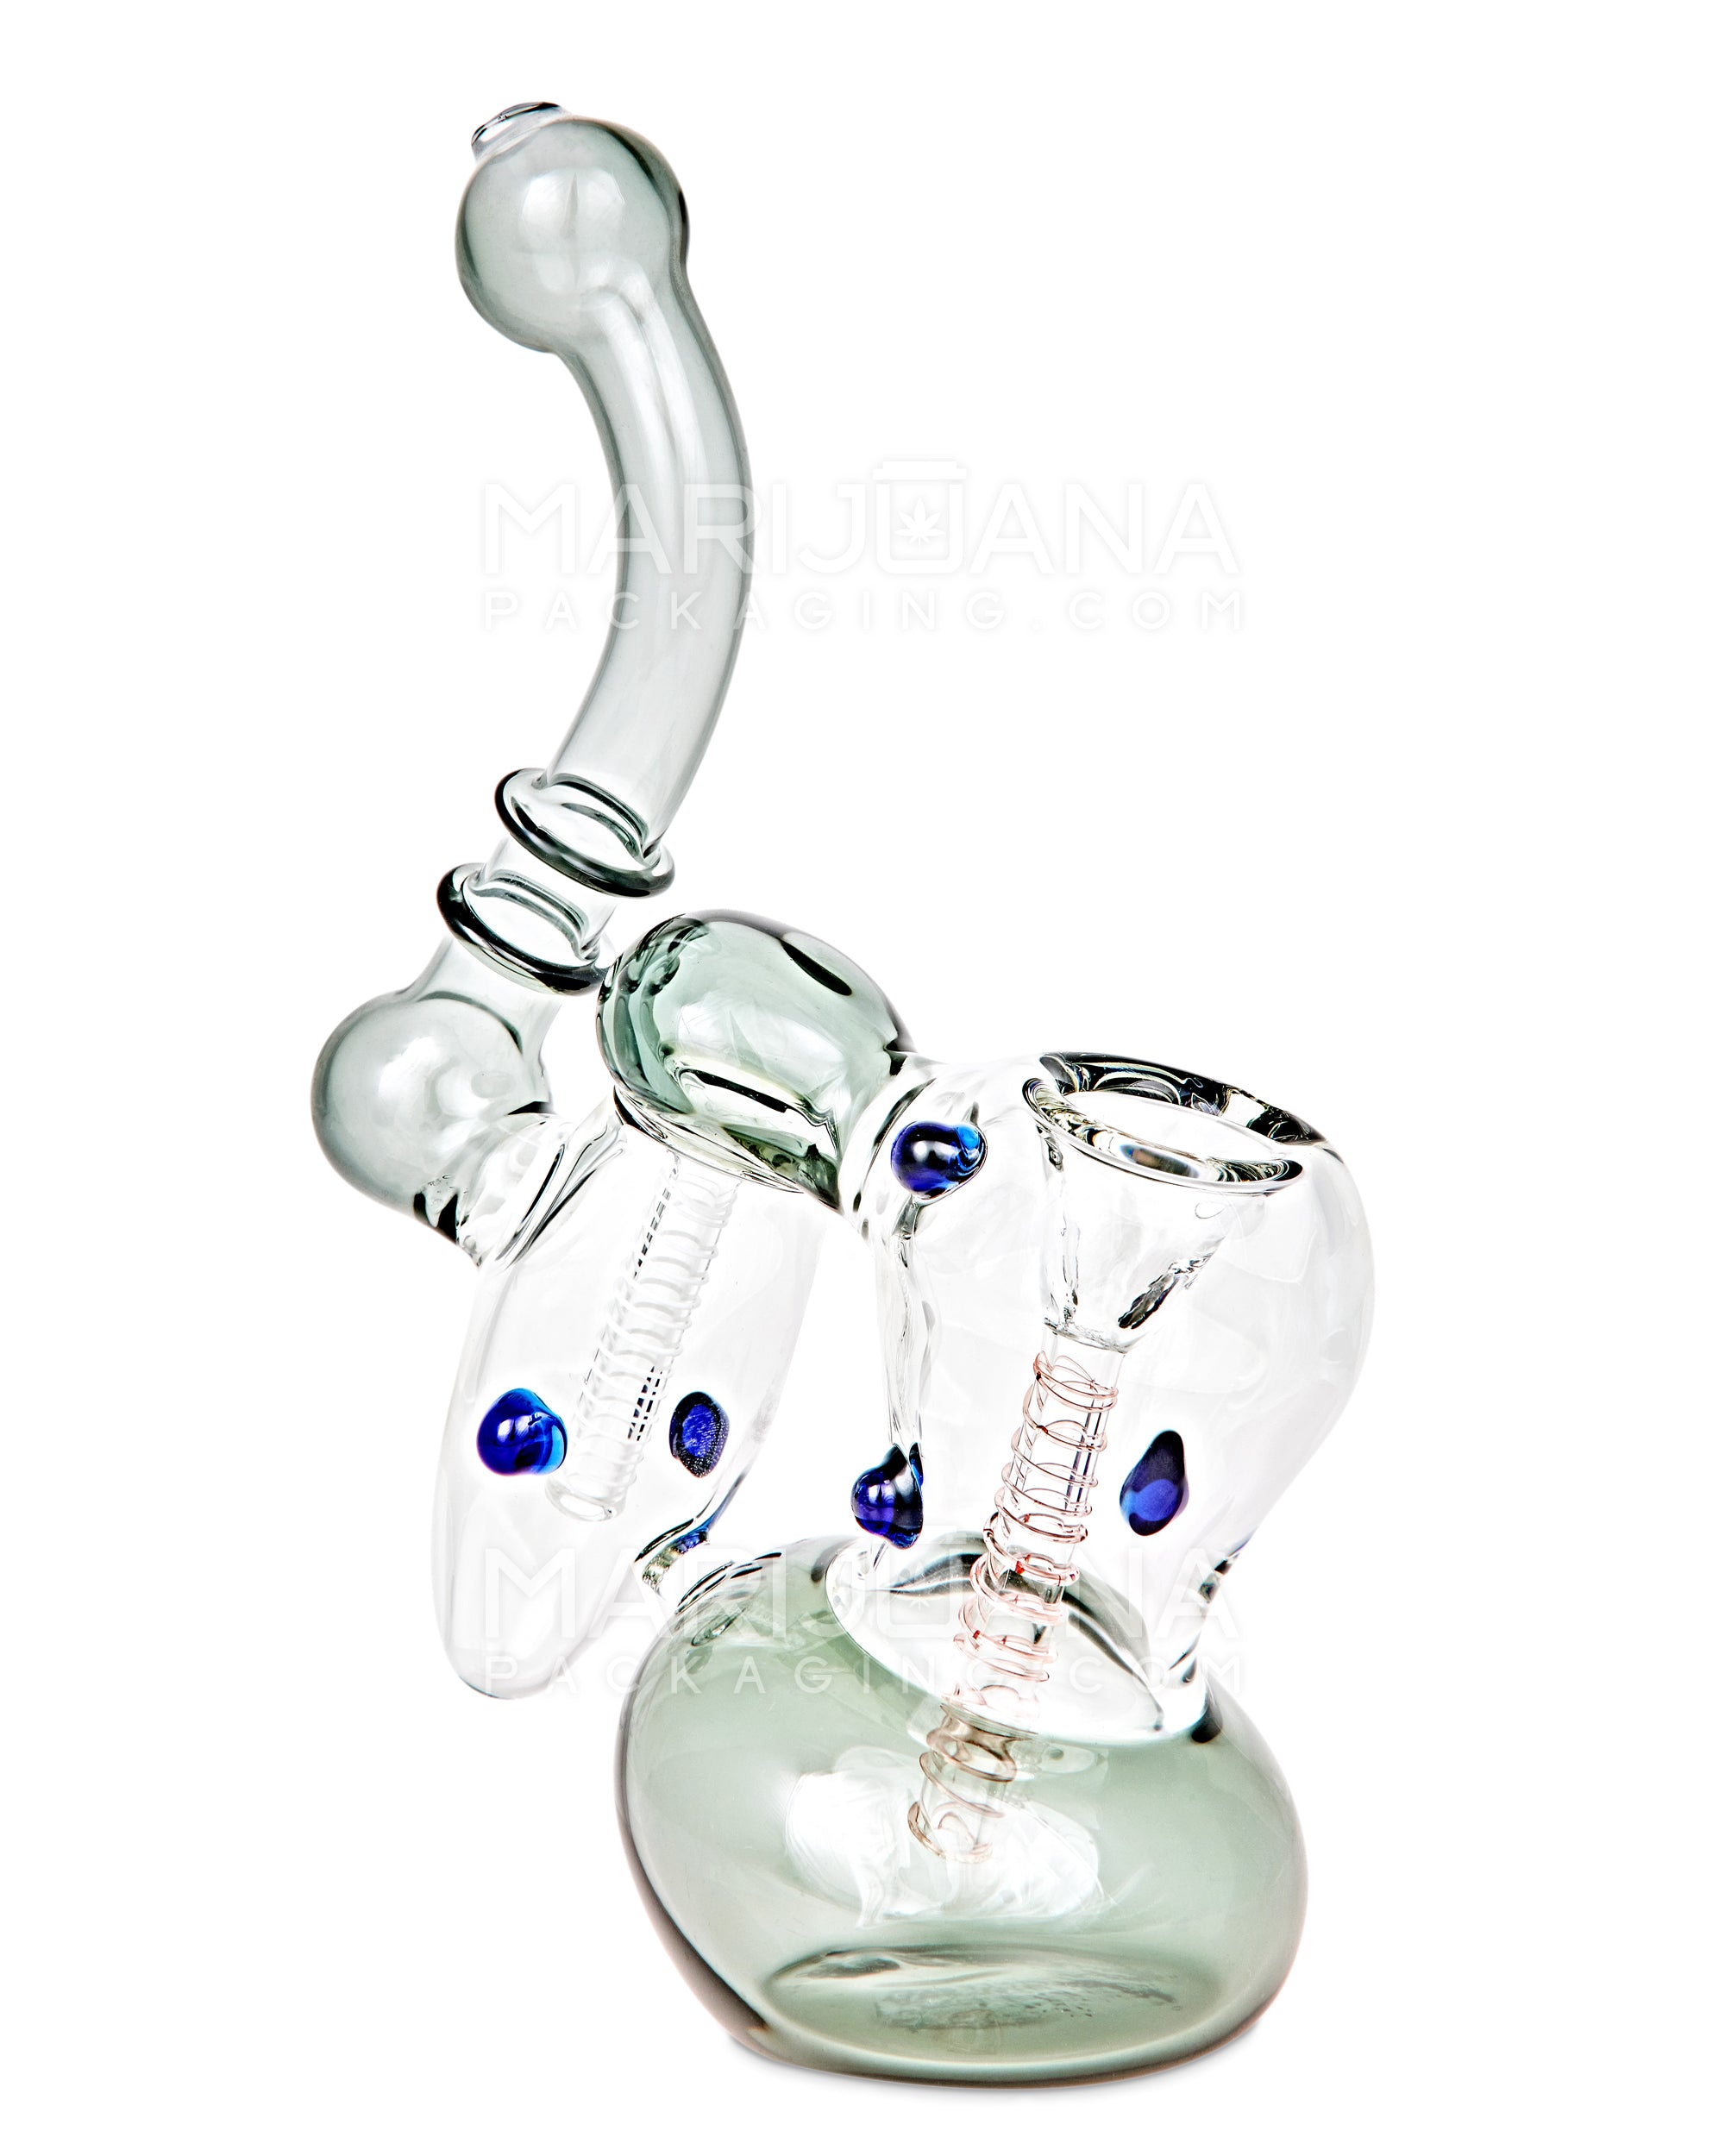 Ringed Double Chamber Bubbler w/ Multi Knockers | 7.5in Tall - Glass - Smoke - 7